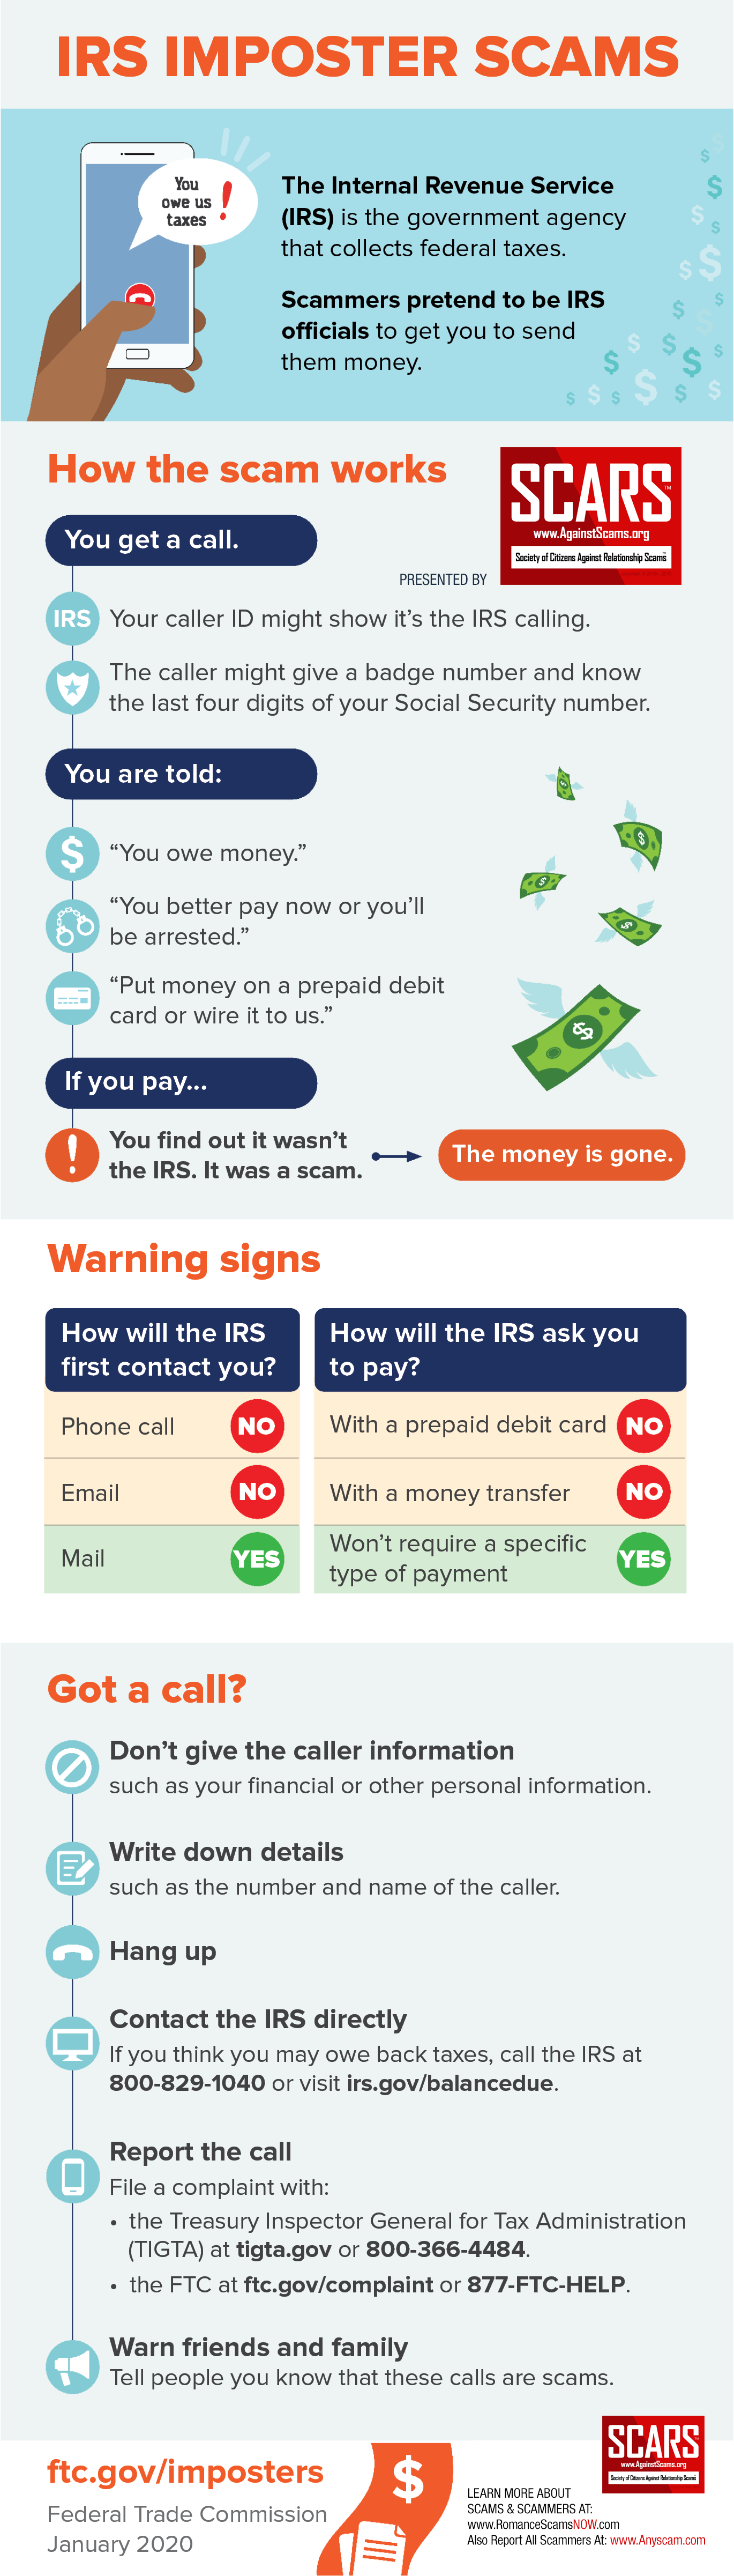 IRS/FTC Tax Identity Theft Infographic presented by SCARS